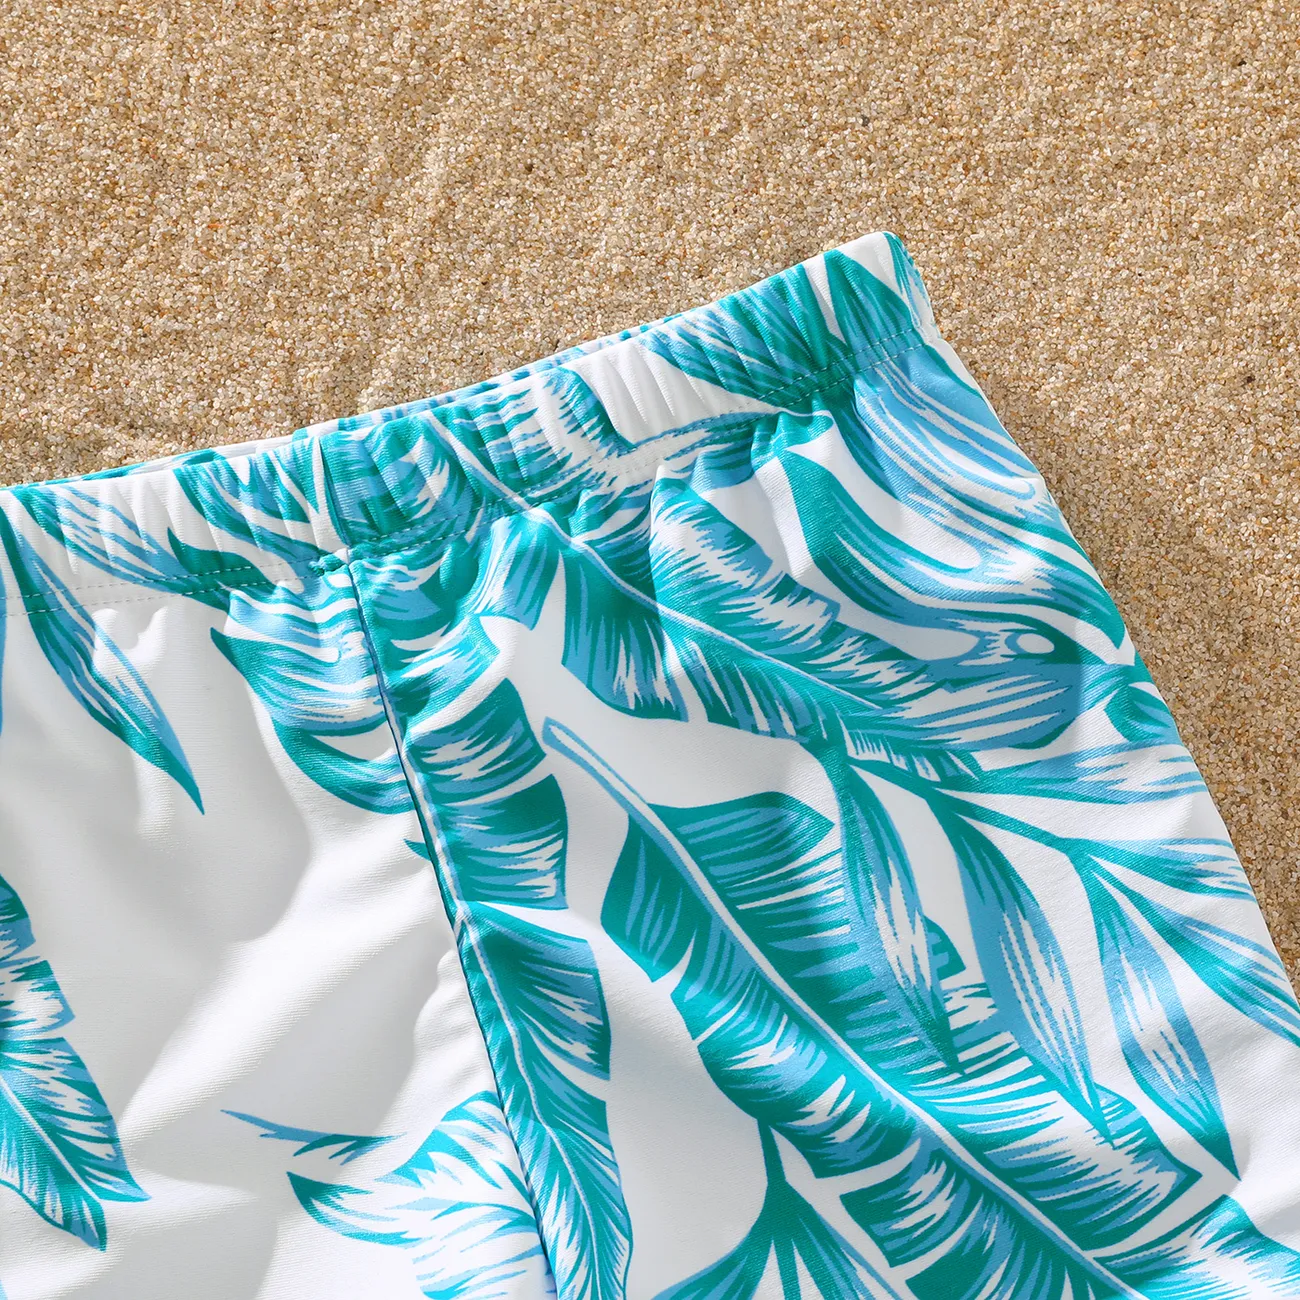 Family Matching Colorblock Textured Self-tie One-Piece Swimsuit and Allover Palm Leaf Print Swim Trunks Shorts BlueGreen big image 1